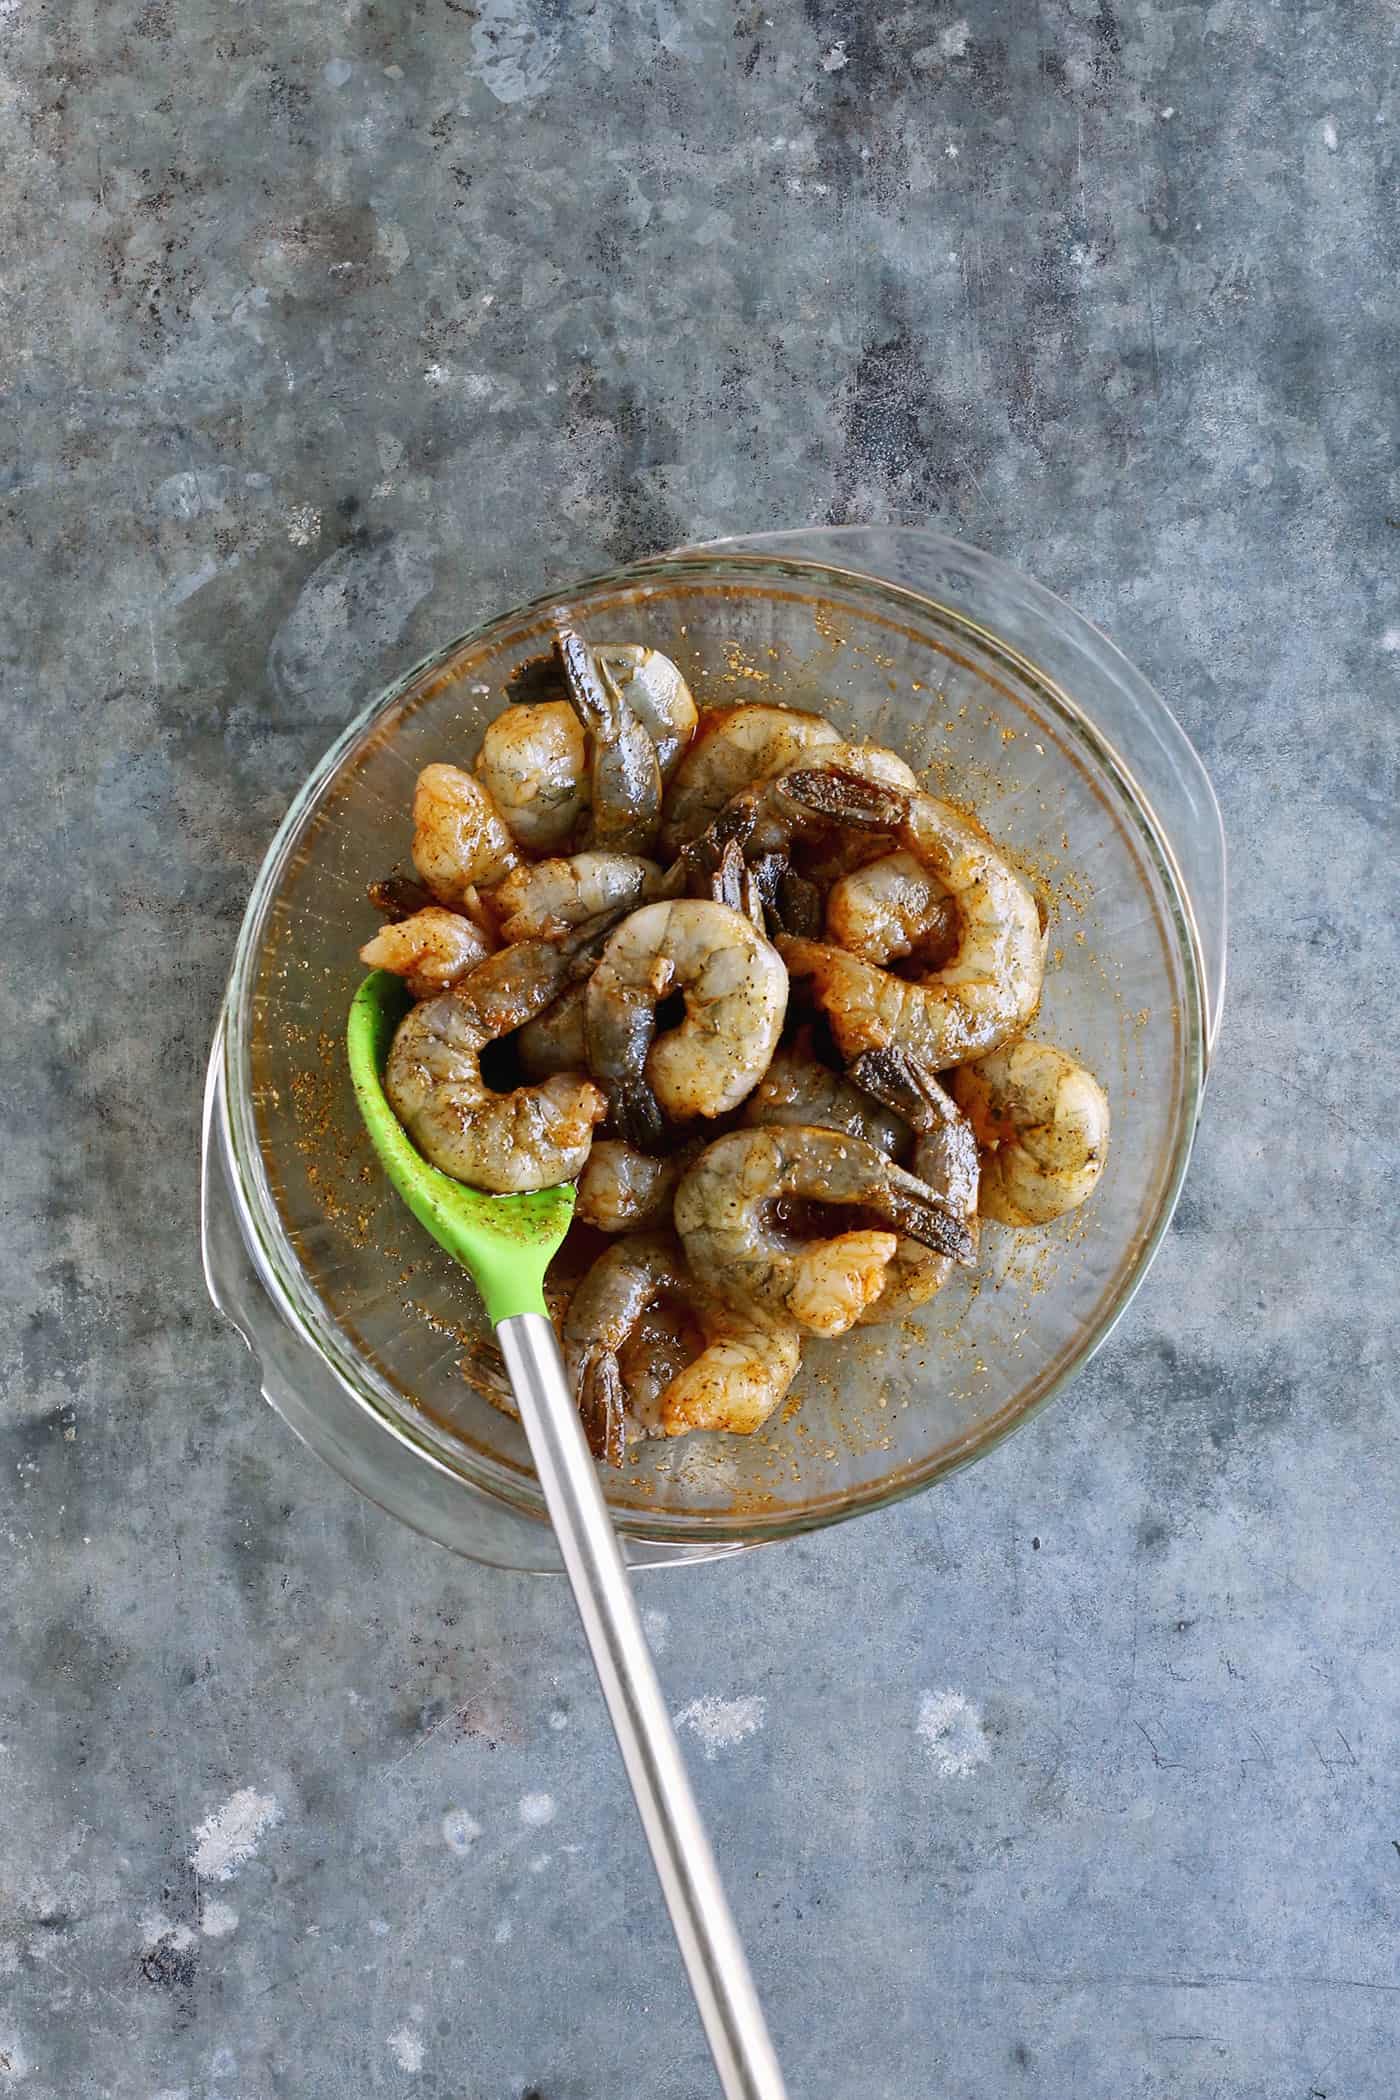 Grilled shrimp coated with a marinade in a glass bowl